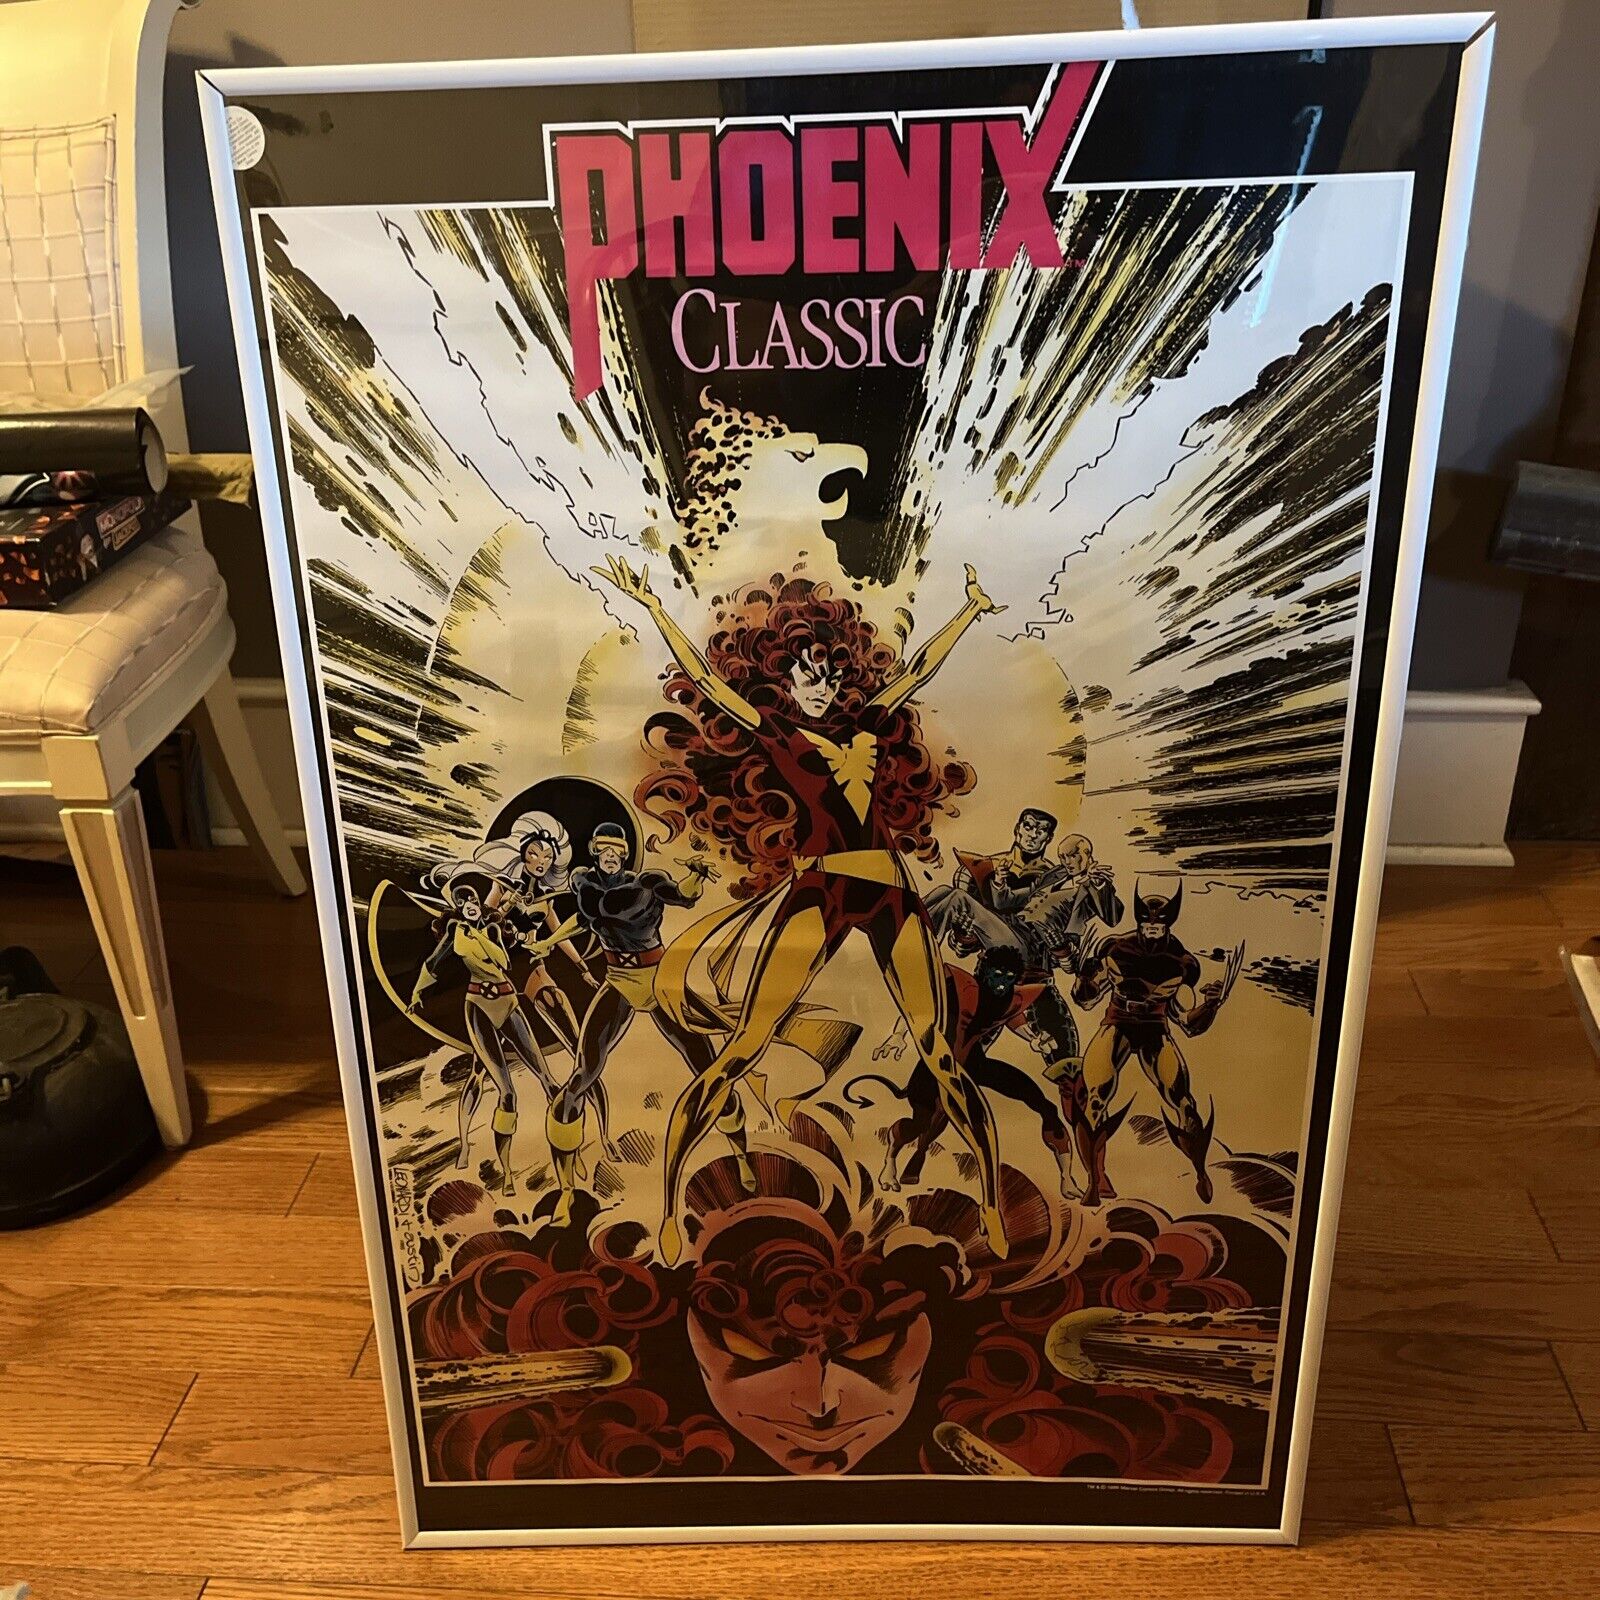 New Original Poster PHOENIX Classic (X-men poster) 1986 Unrolled For Photos